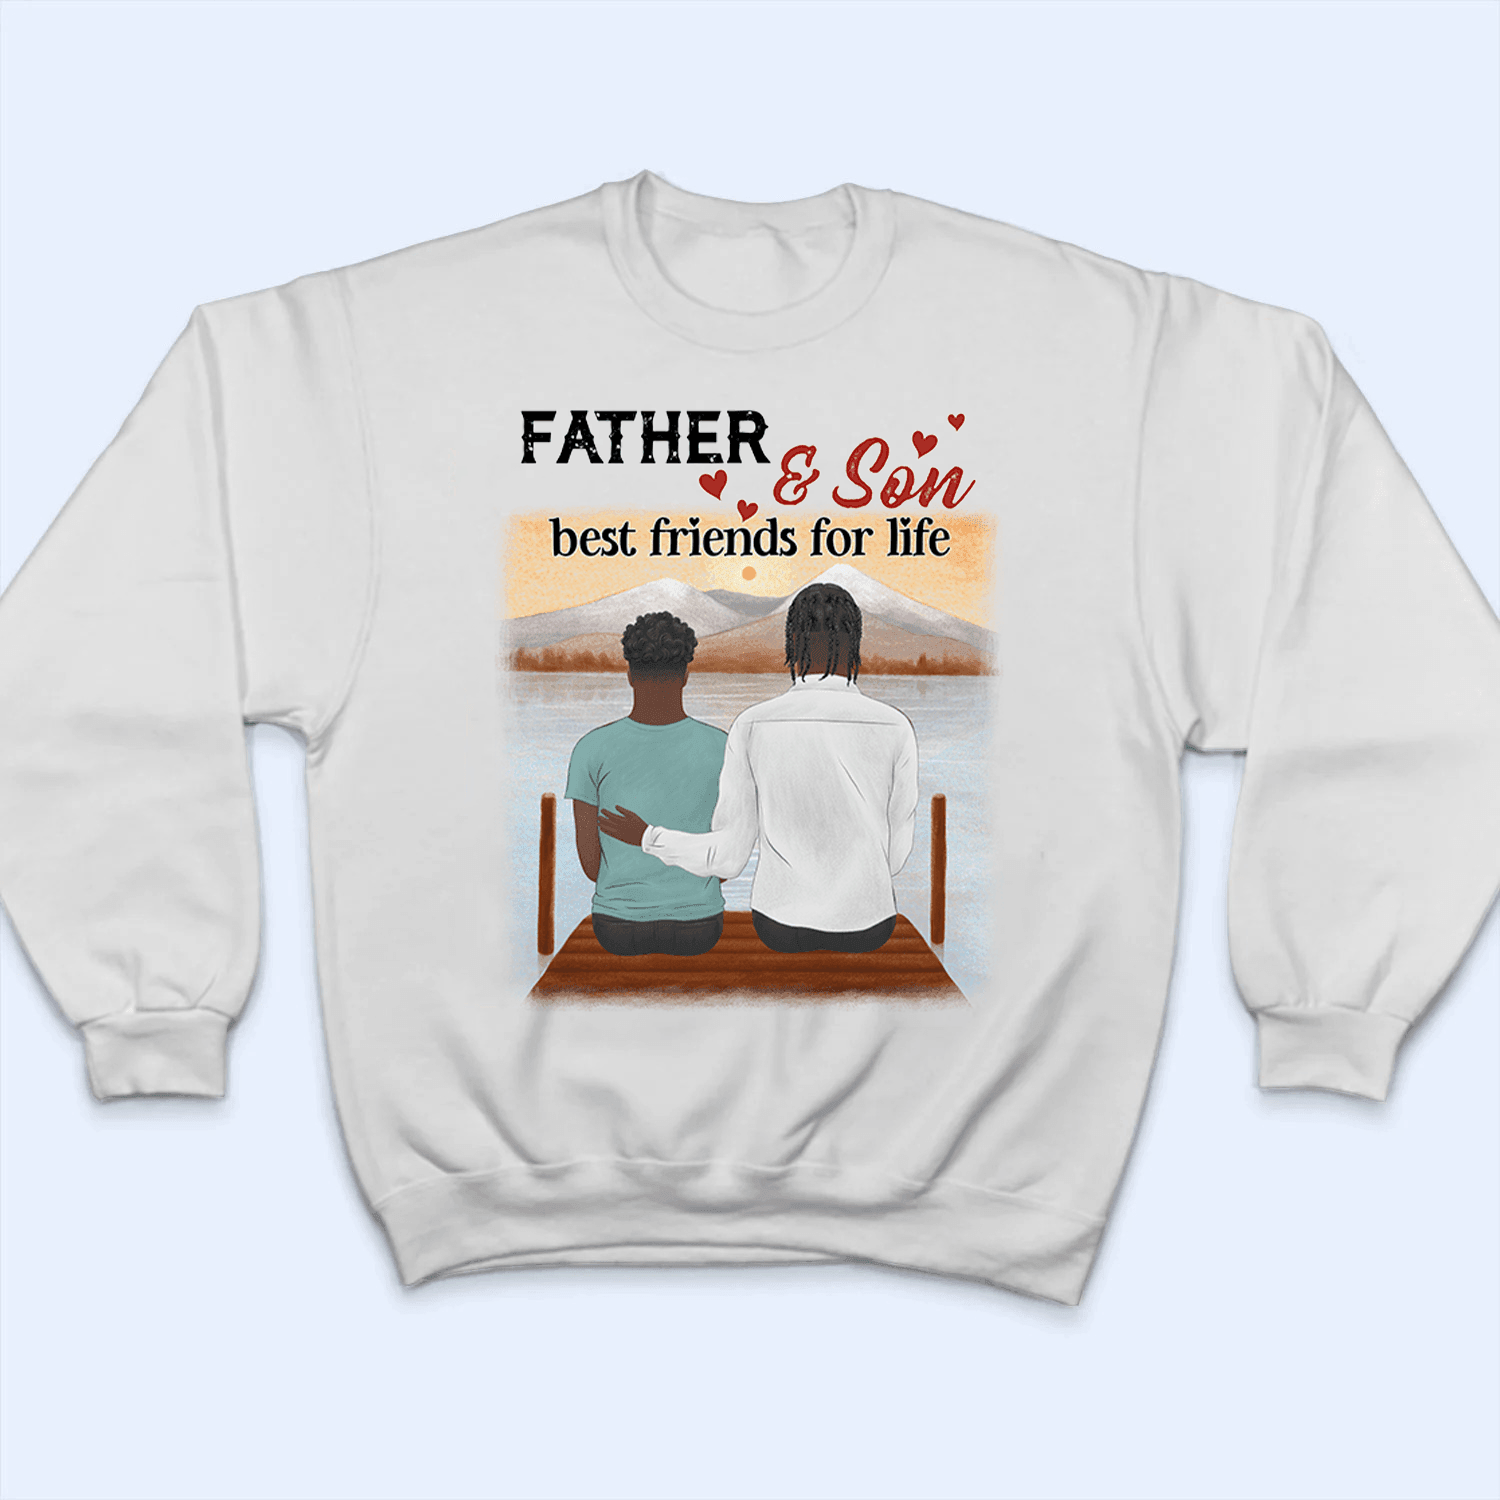 Father & Daughter/Son - Personalized Custom T Shirt - Father's Day Gift for Dad, Father, Daddy, Dada, Dad Jokes - Suzitee Store